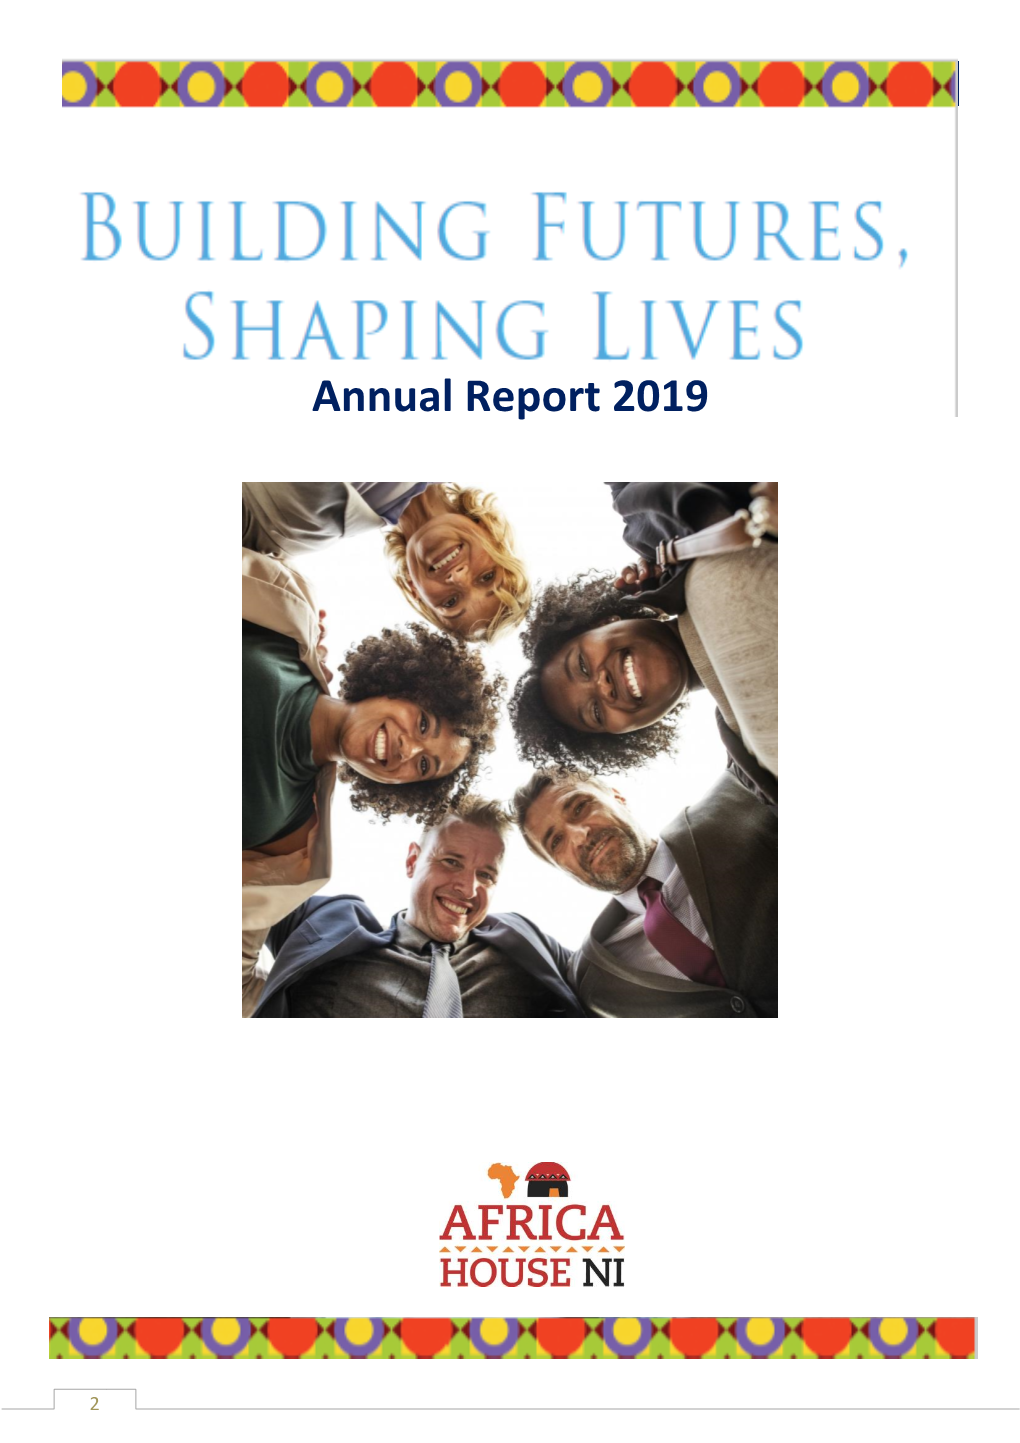 Africa House (Ni) Annual Report 2019